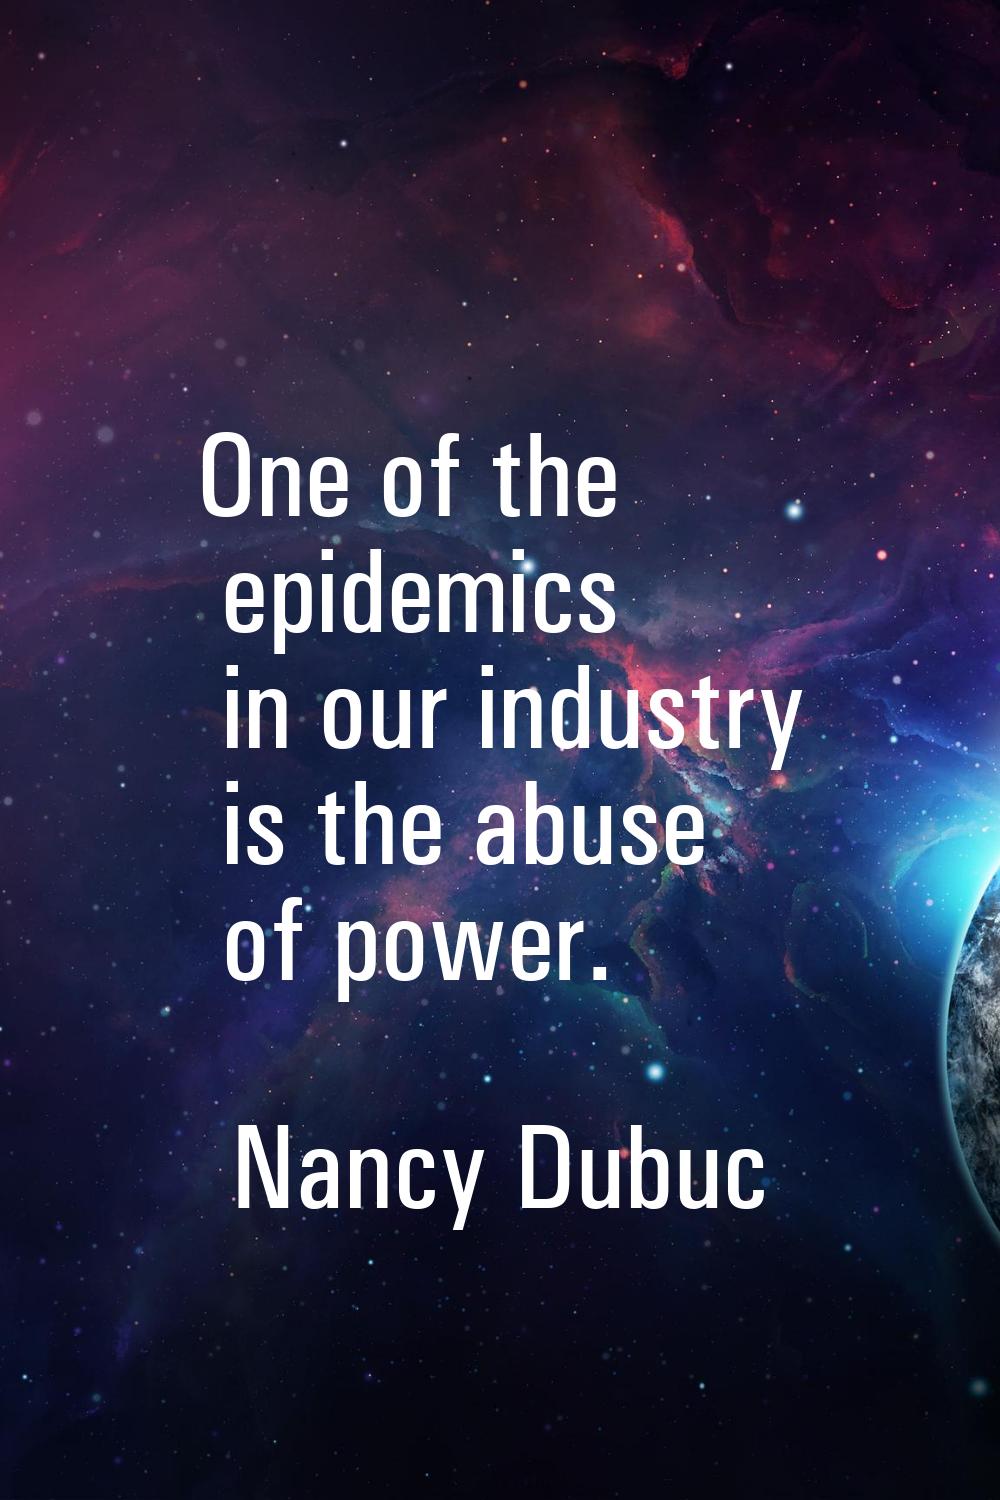 One of the epidemics in our industry is the abuse of power.